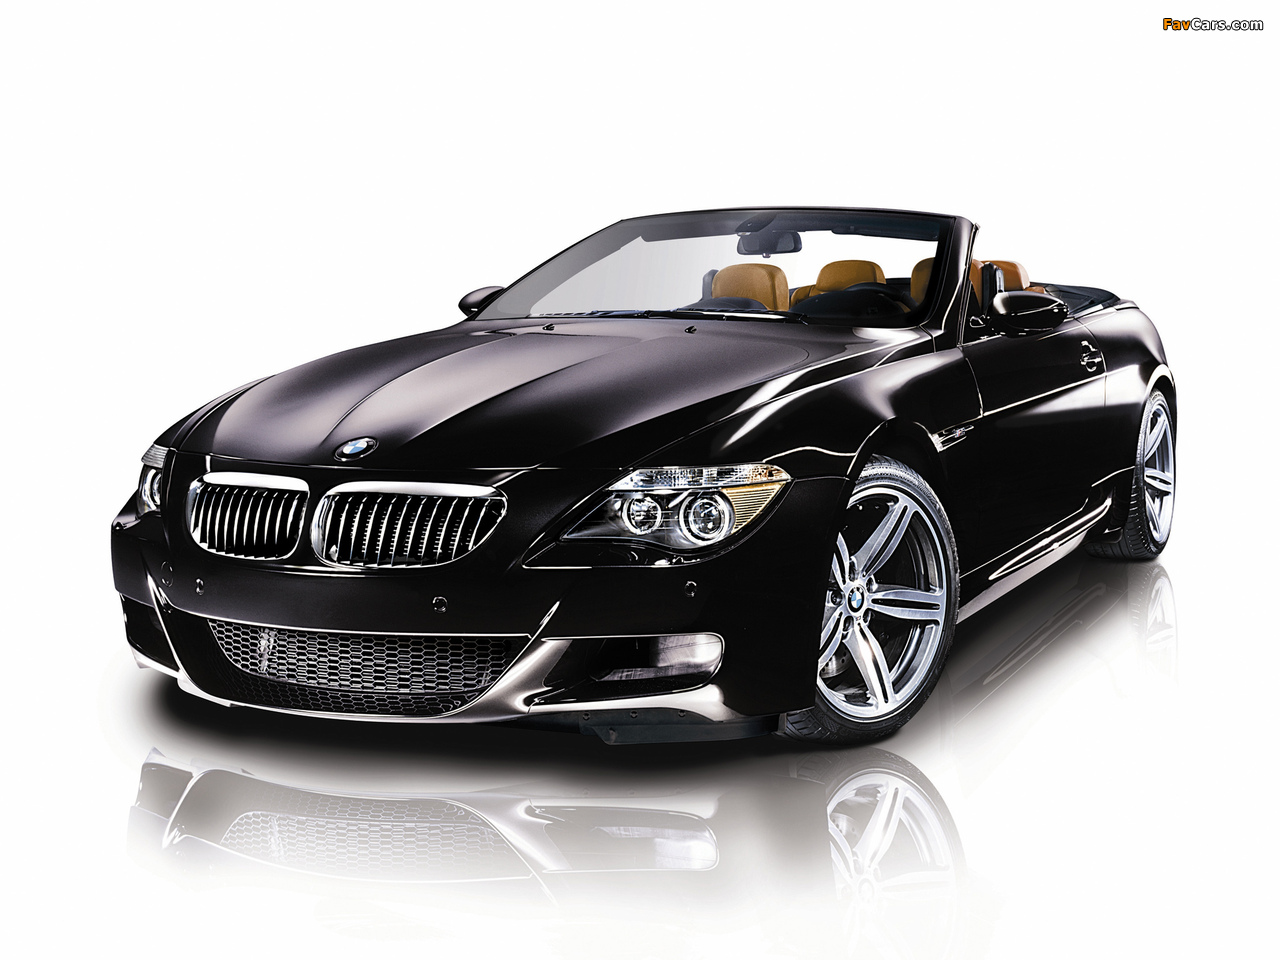 BMW M6 Convertible Neiman Marcus Edition (E64) 2007 pictures (1280 x 960)